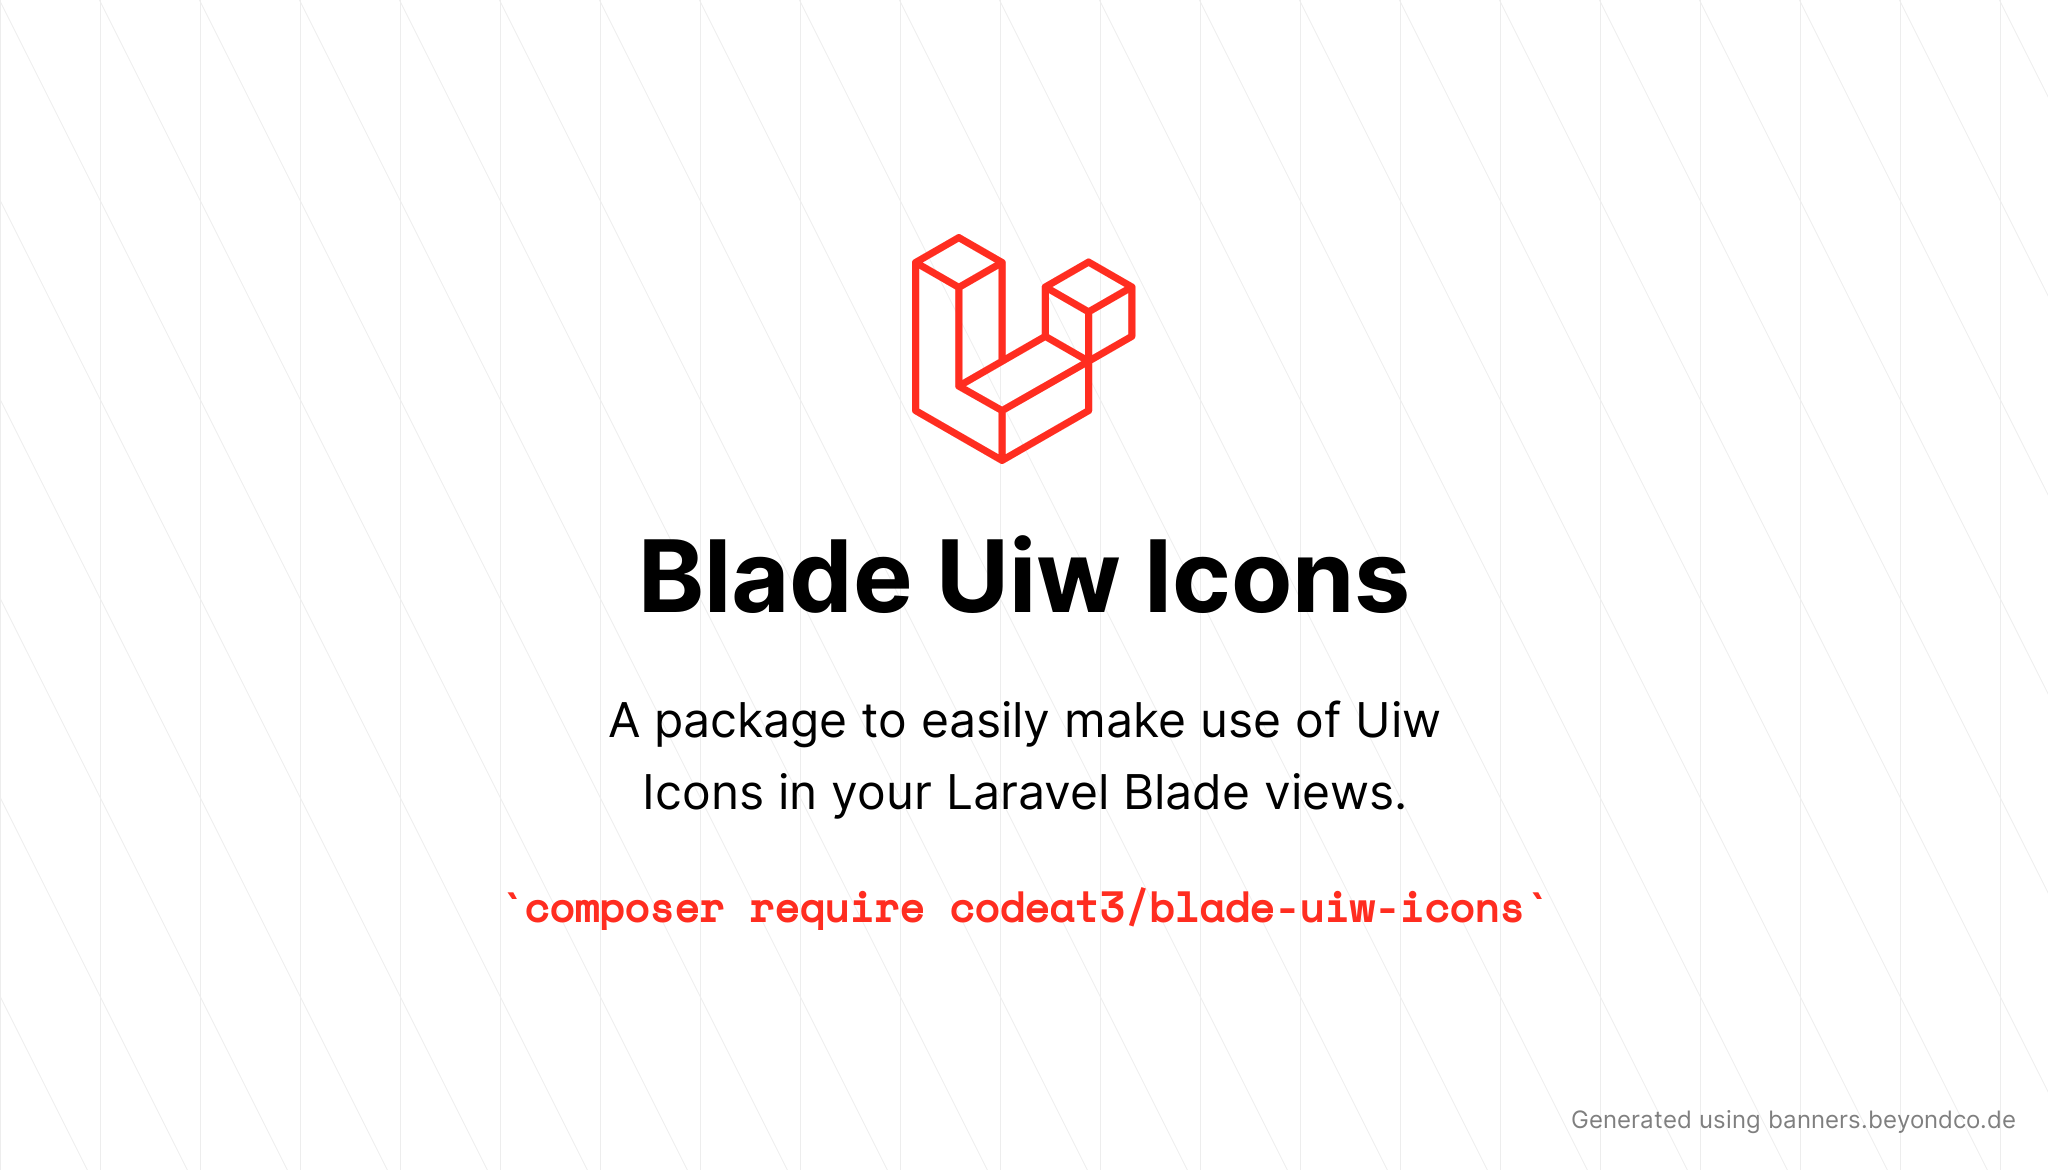 socialcard-blade-uiw-icons.png